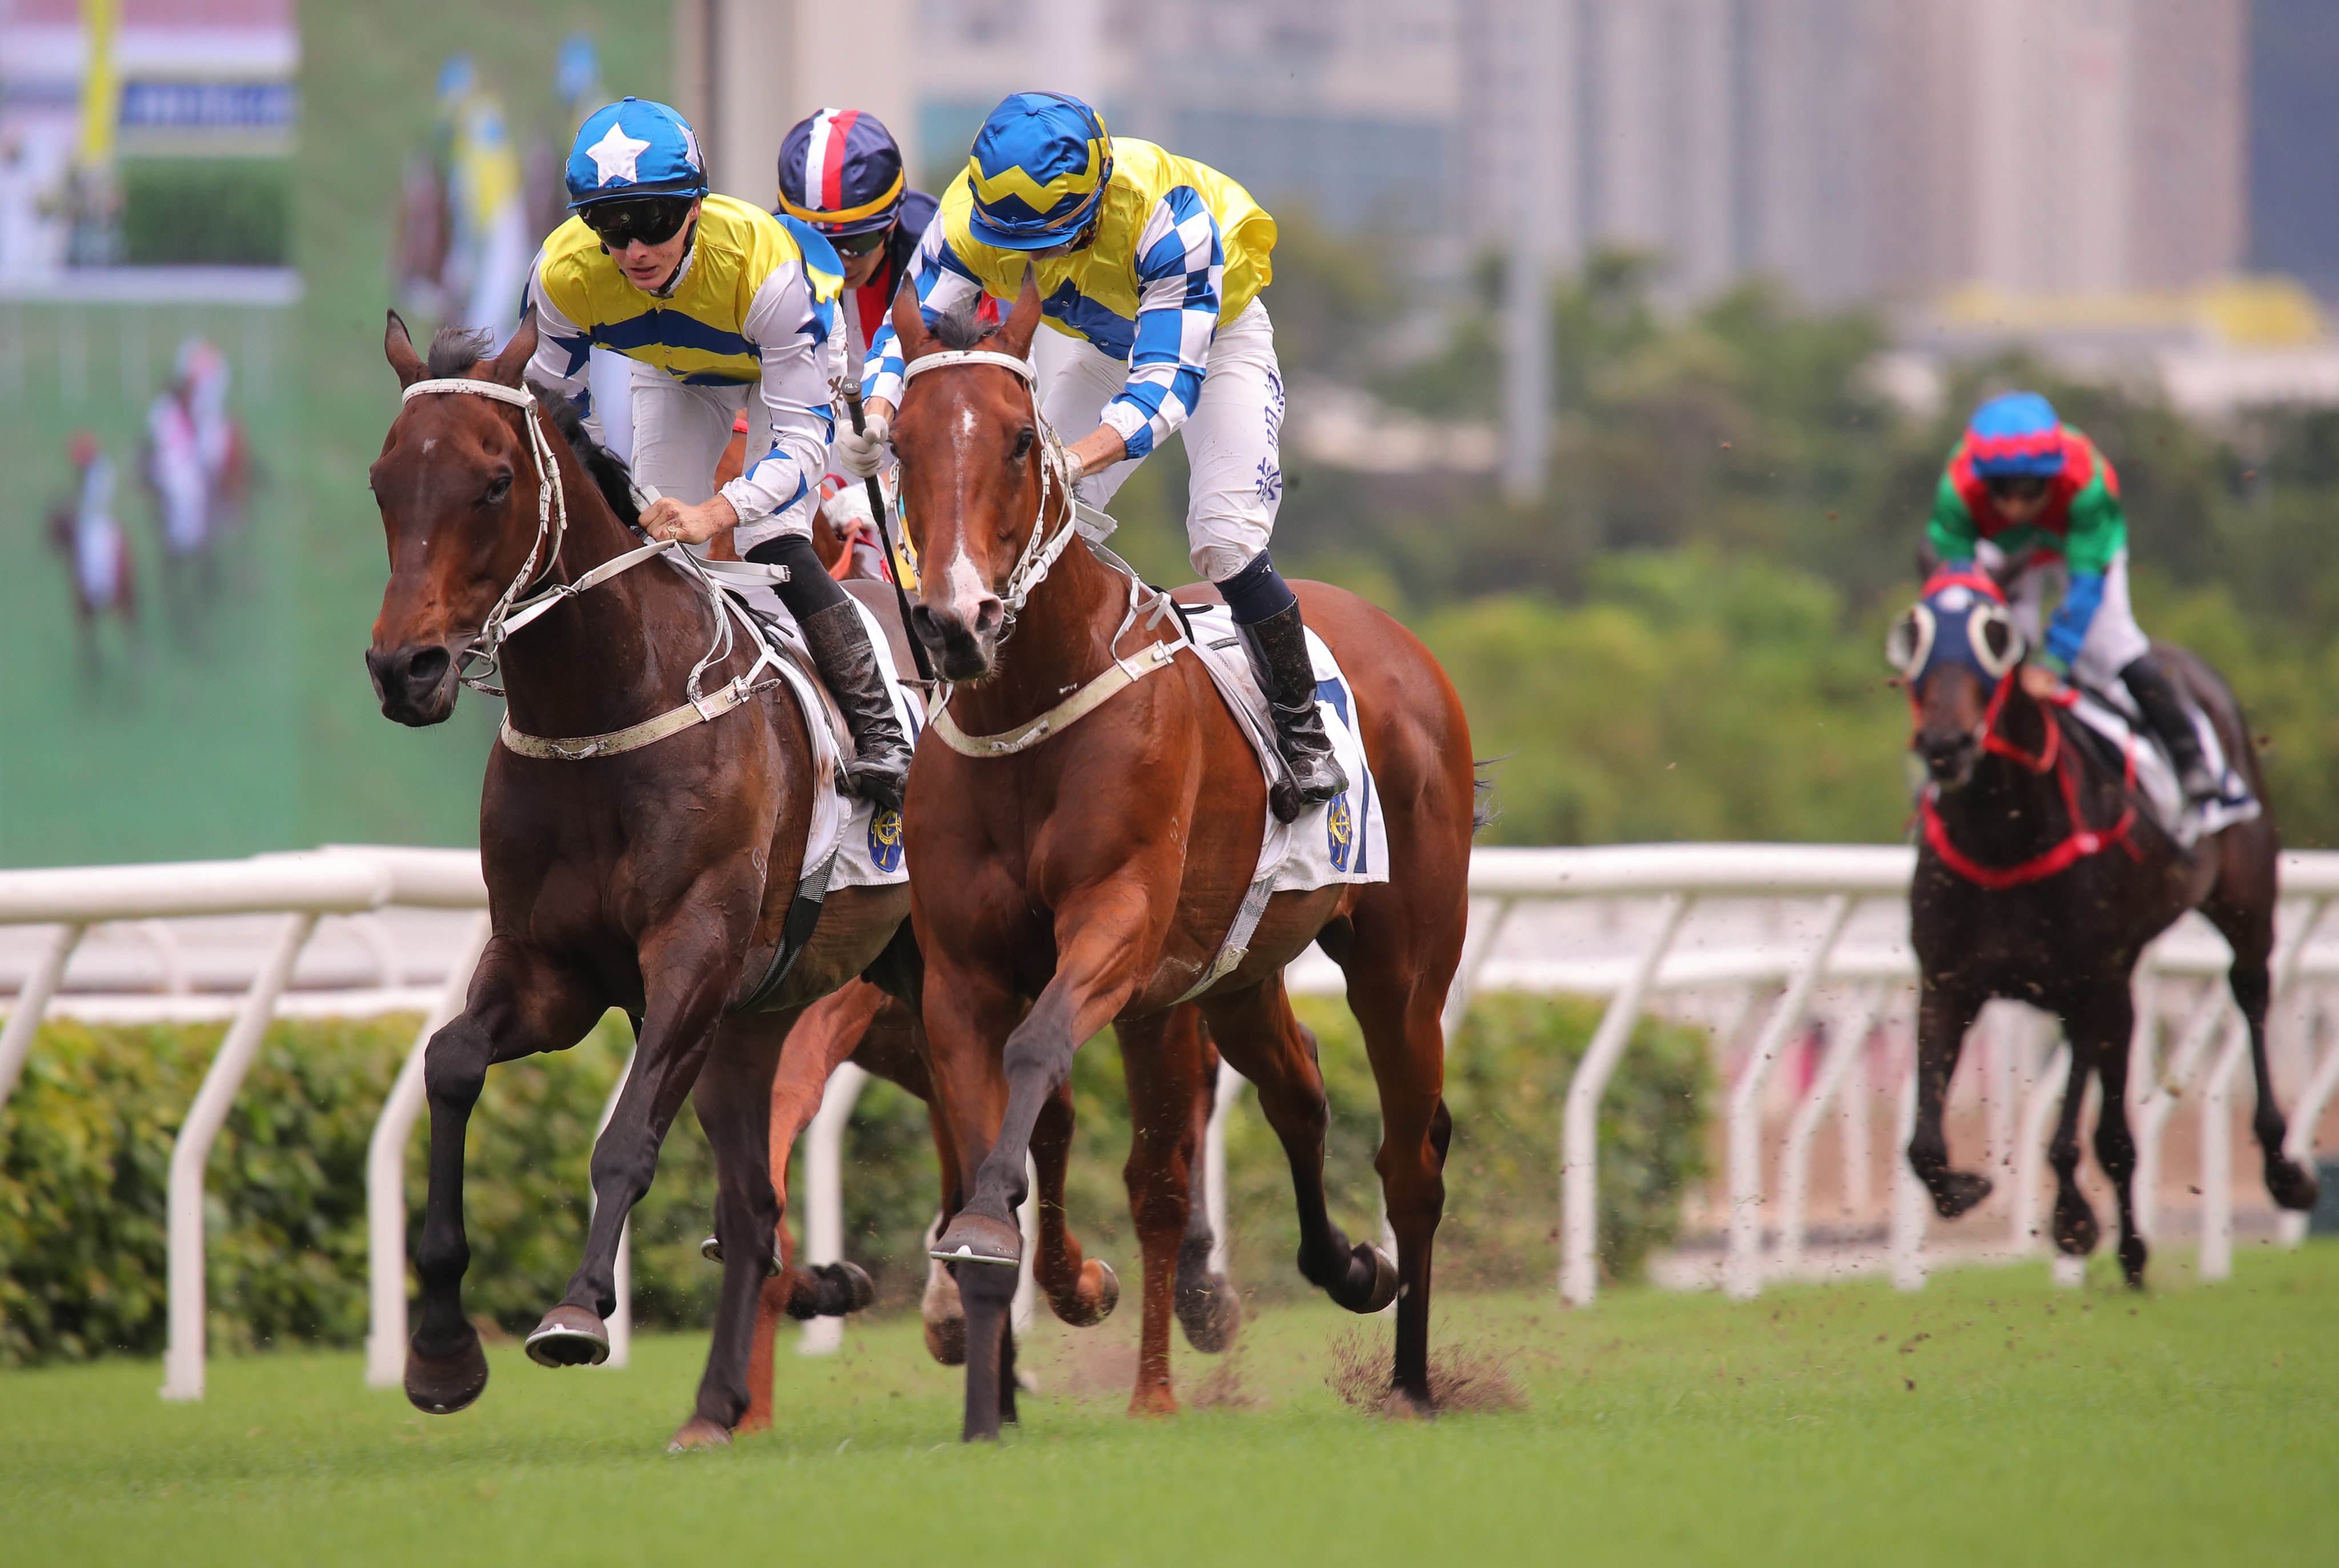 La City Blanche (centre) narrowly defeats Five G Patch in the Queen Mother Memorial Cup. Photos: Kenneth Chan